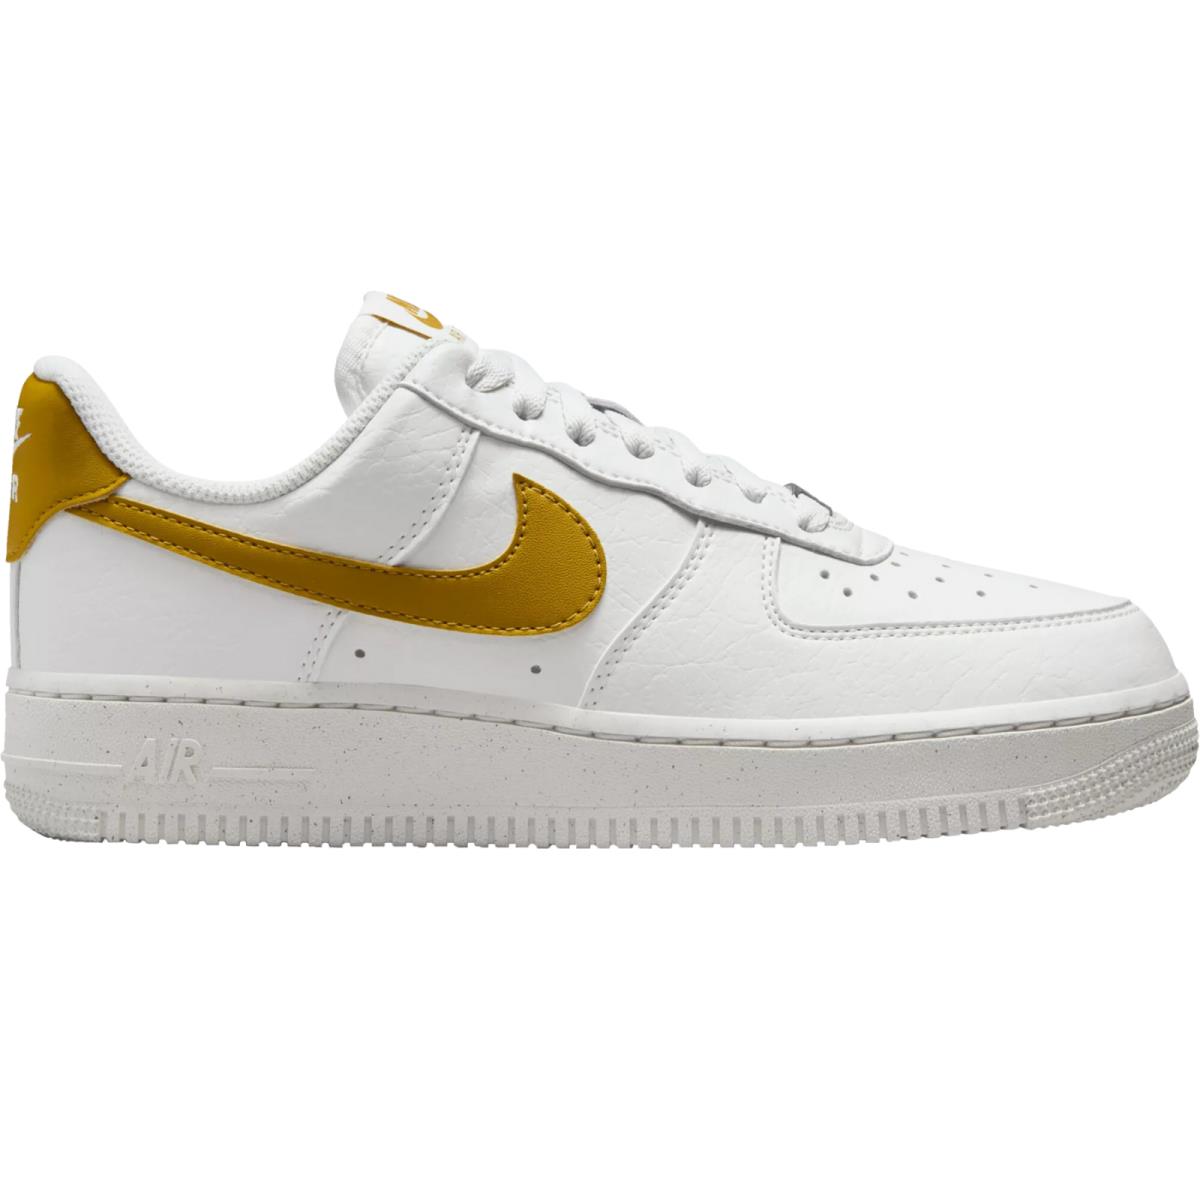 Nike Air Force 1 Women`s Casual Shoes All Colors US Sizes 6-11 Summit White/Metallic Silver/Bronzine